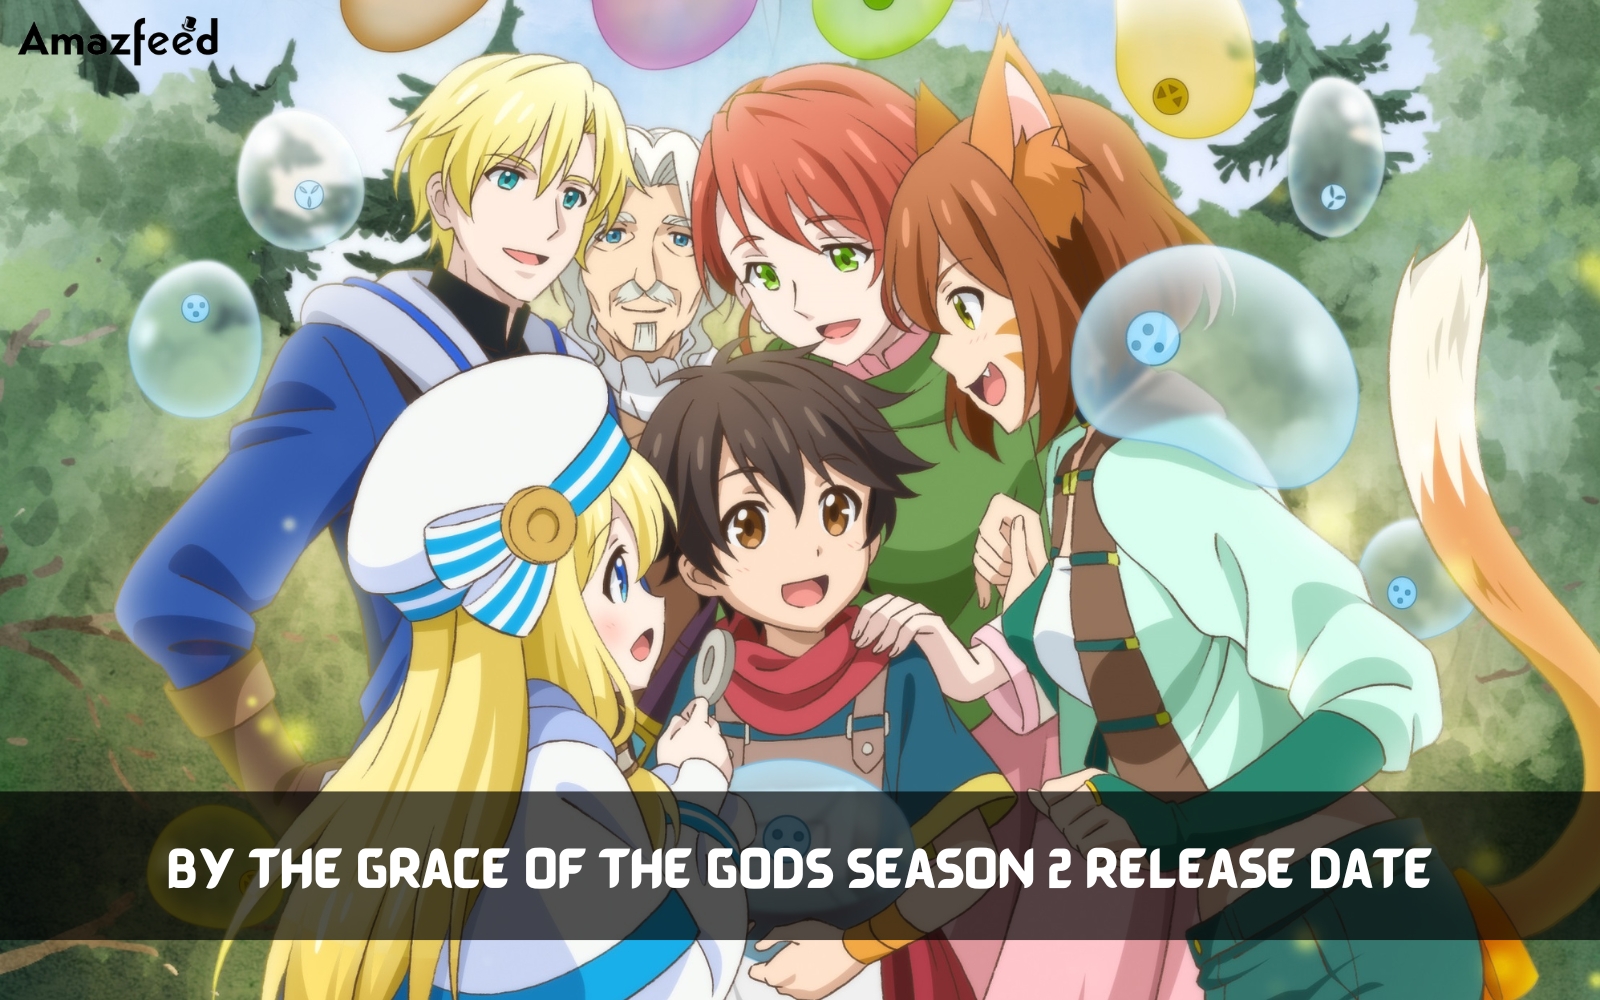 By the Grace of the Gods season 2 release date